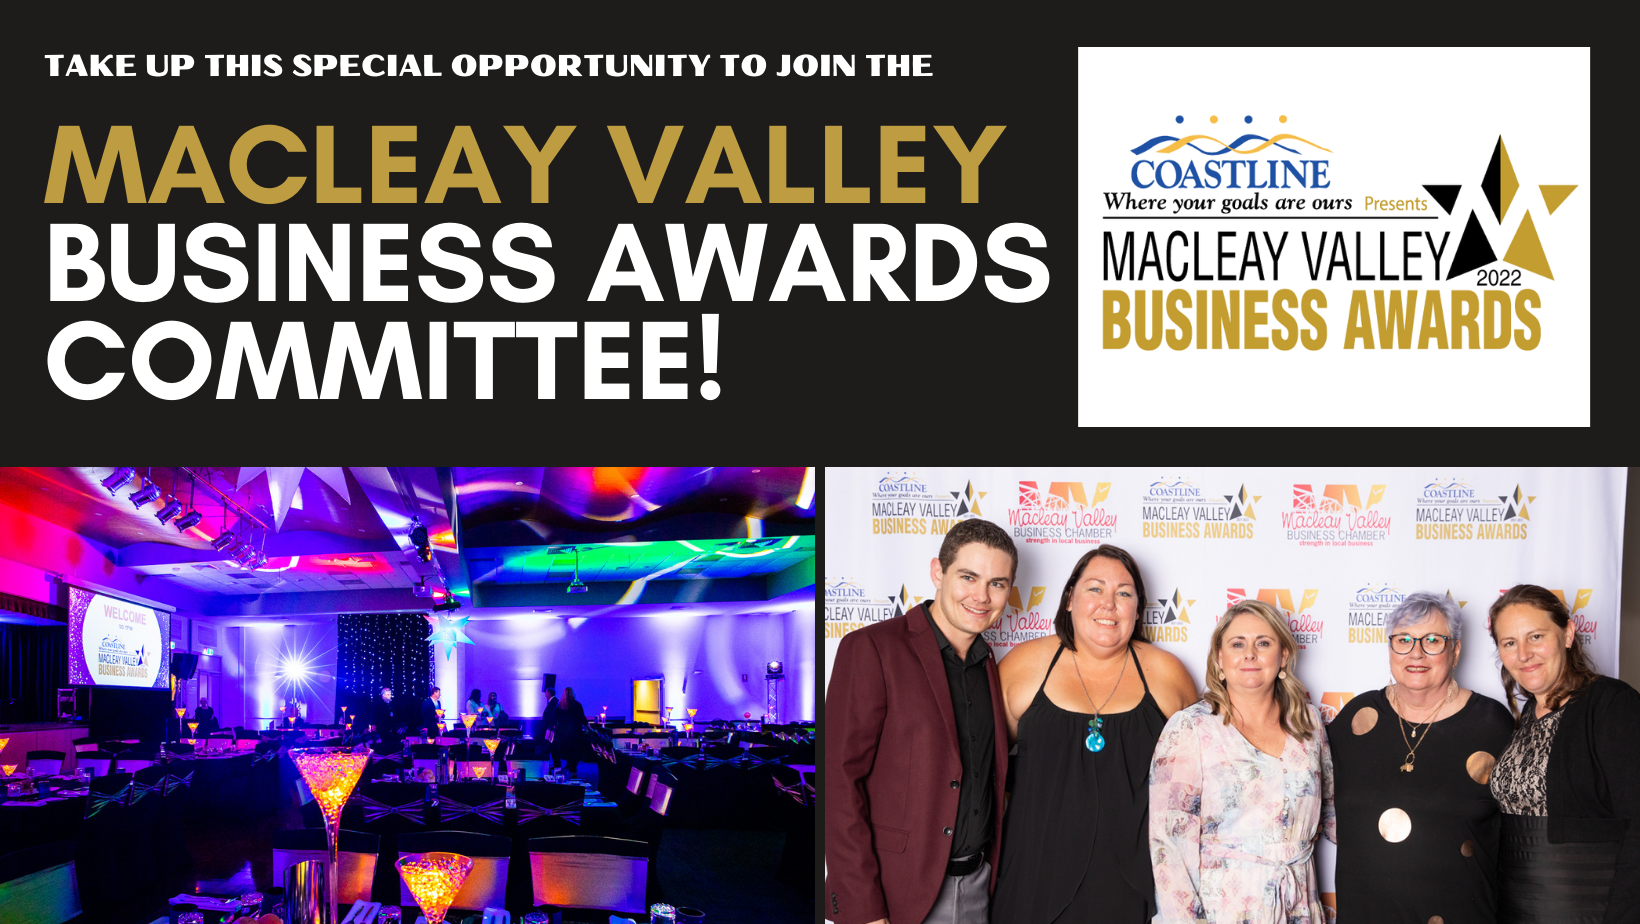 Join the Business Awards Committee